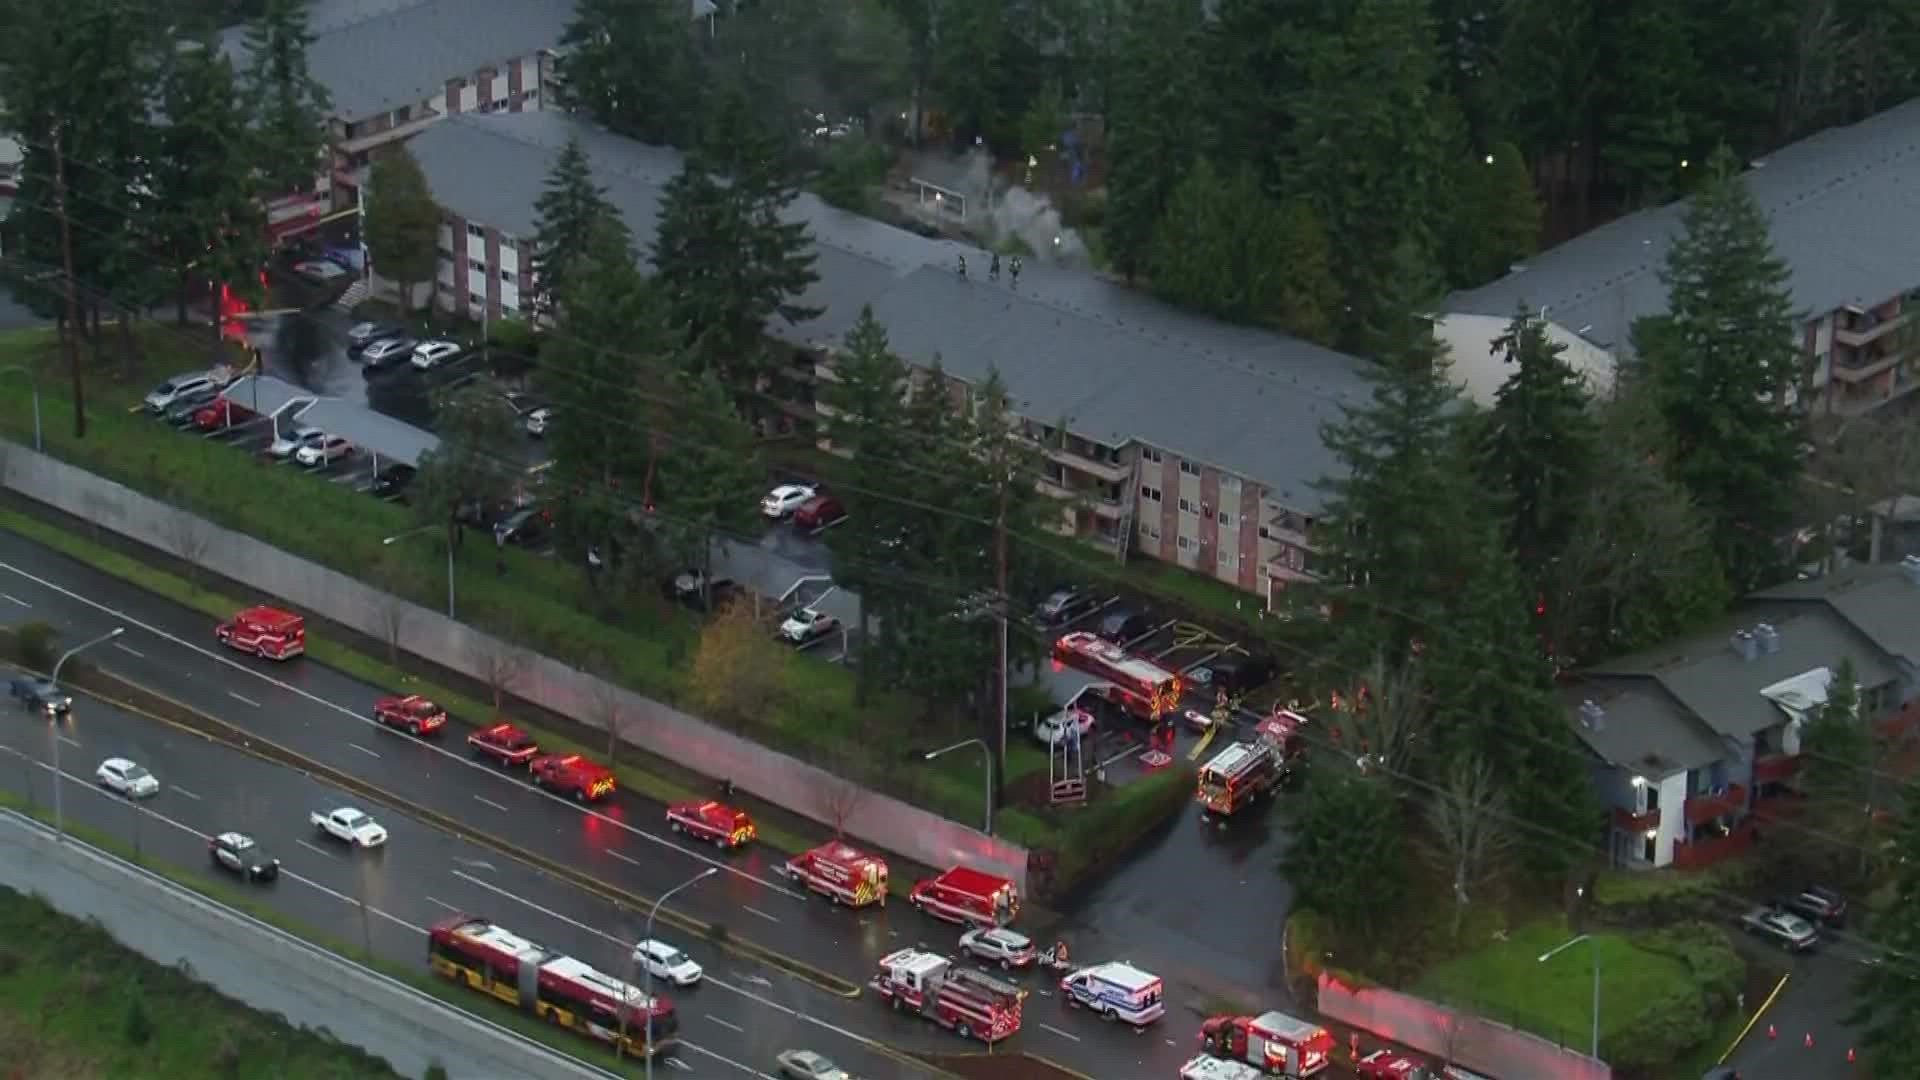 Crews reportedly staged multiple ladder and balcony rescues already at an apartment building on Pacific Highway South.